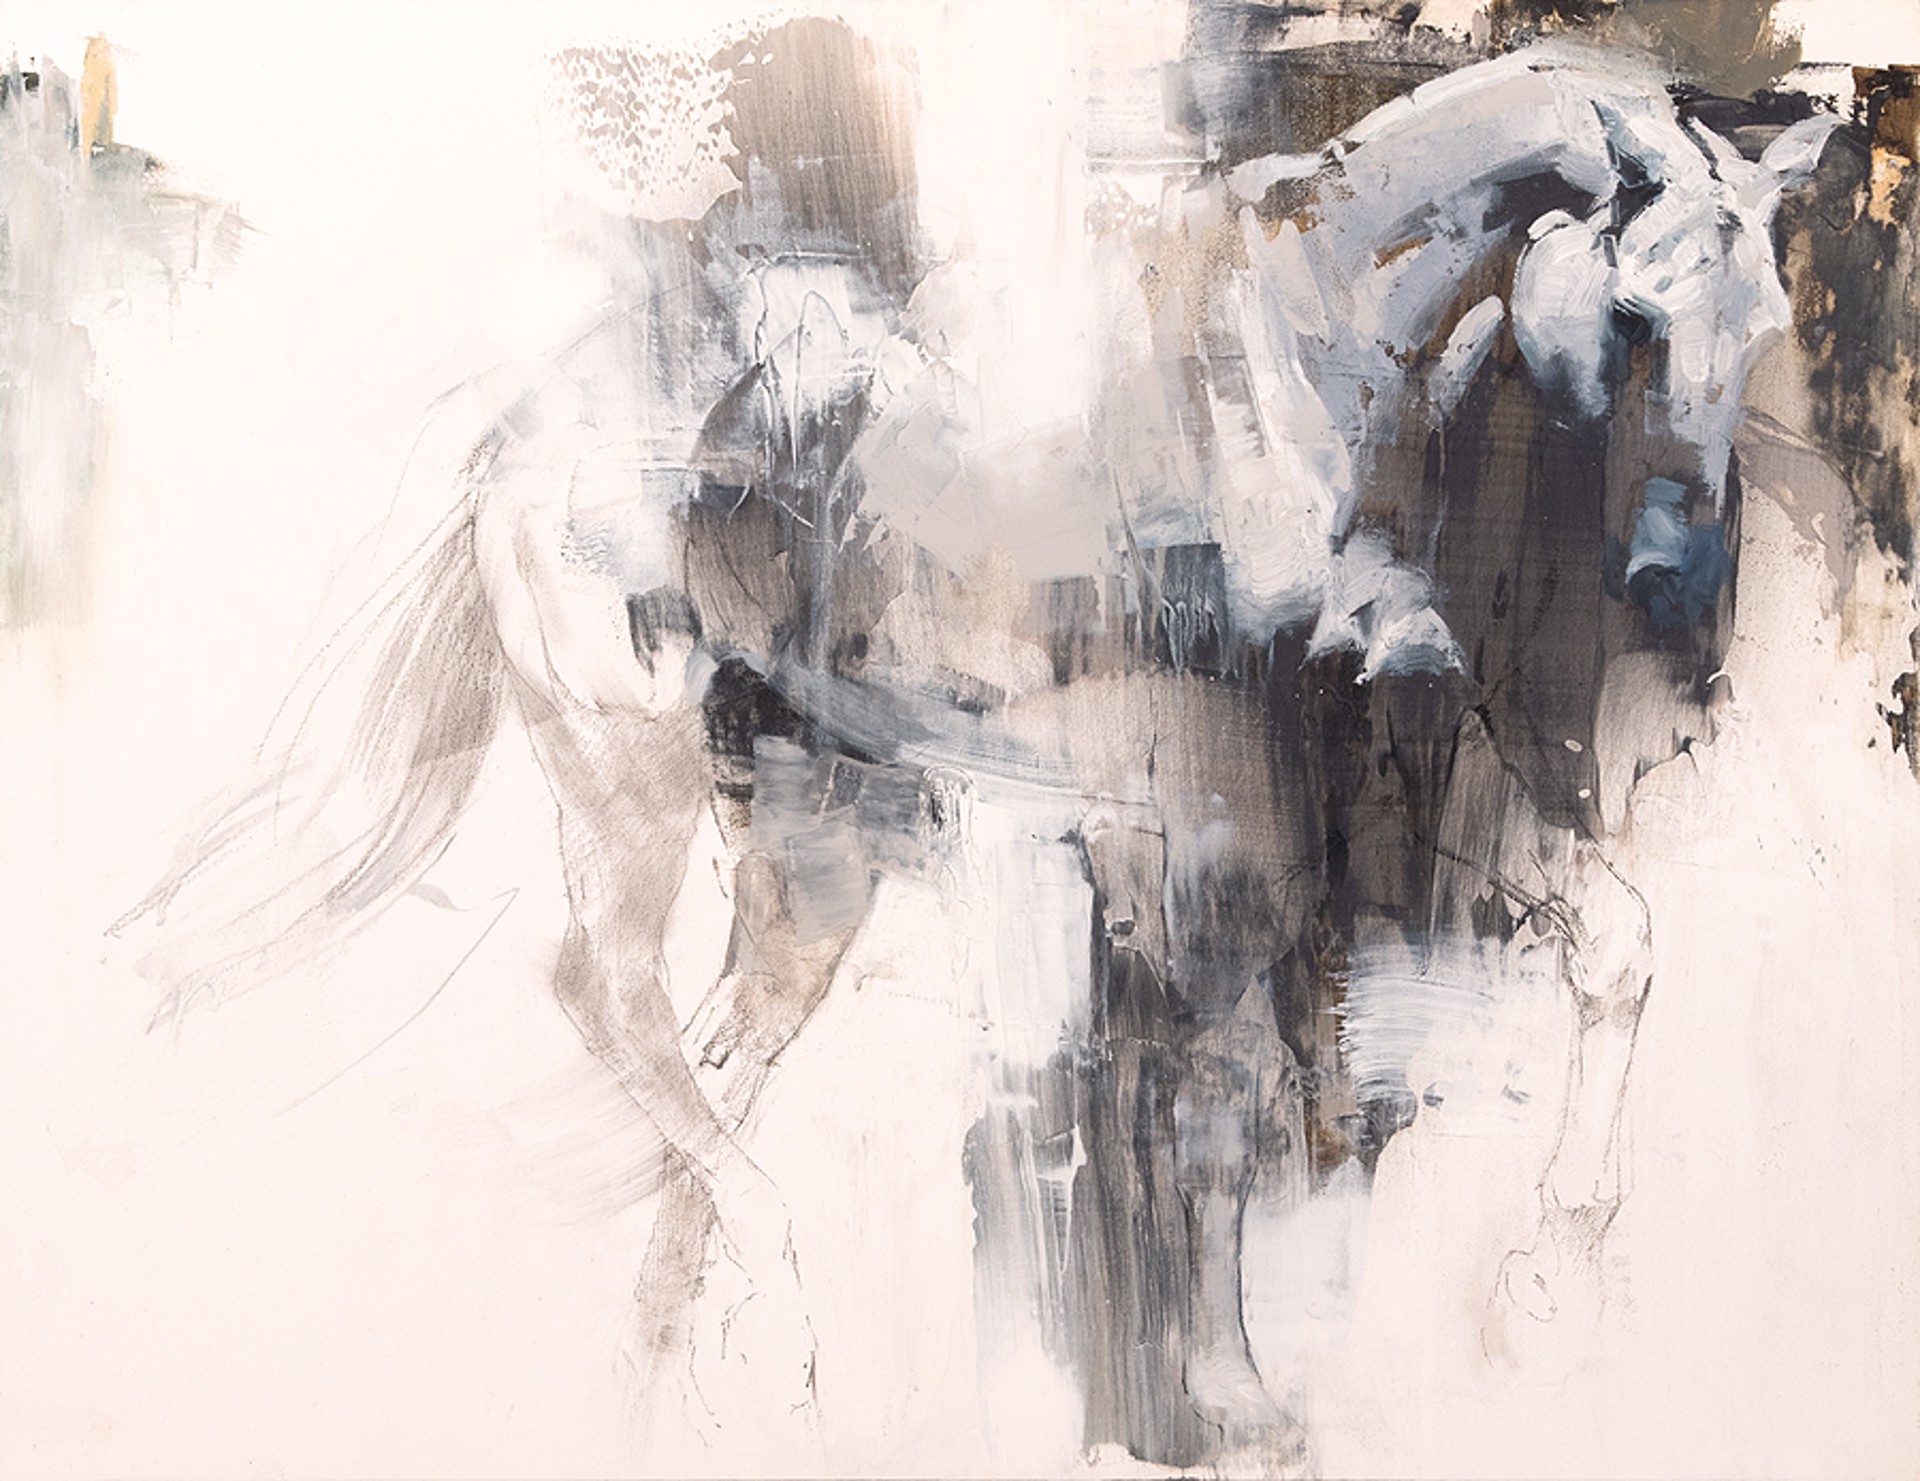 Original Painting Of A White Horse In An Abstract Contemporary Style With Partial Obstruction Of The Figure Behind Brush Strokes, By Julie Chapman 